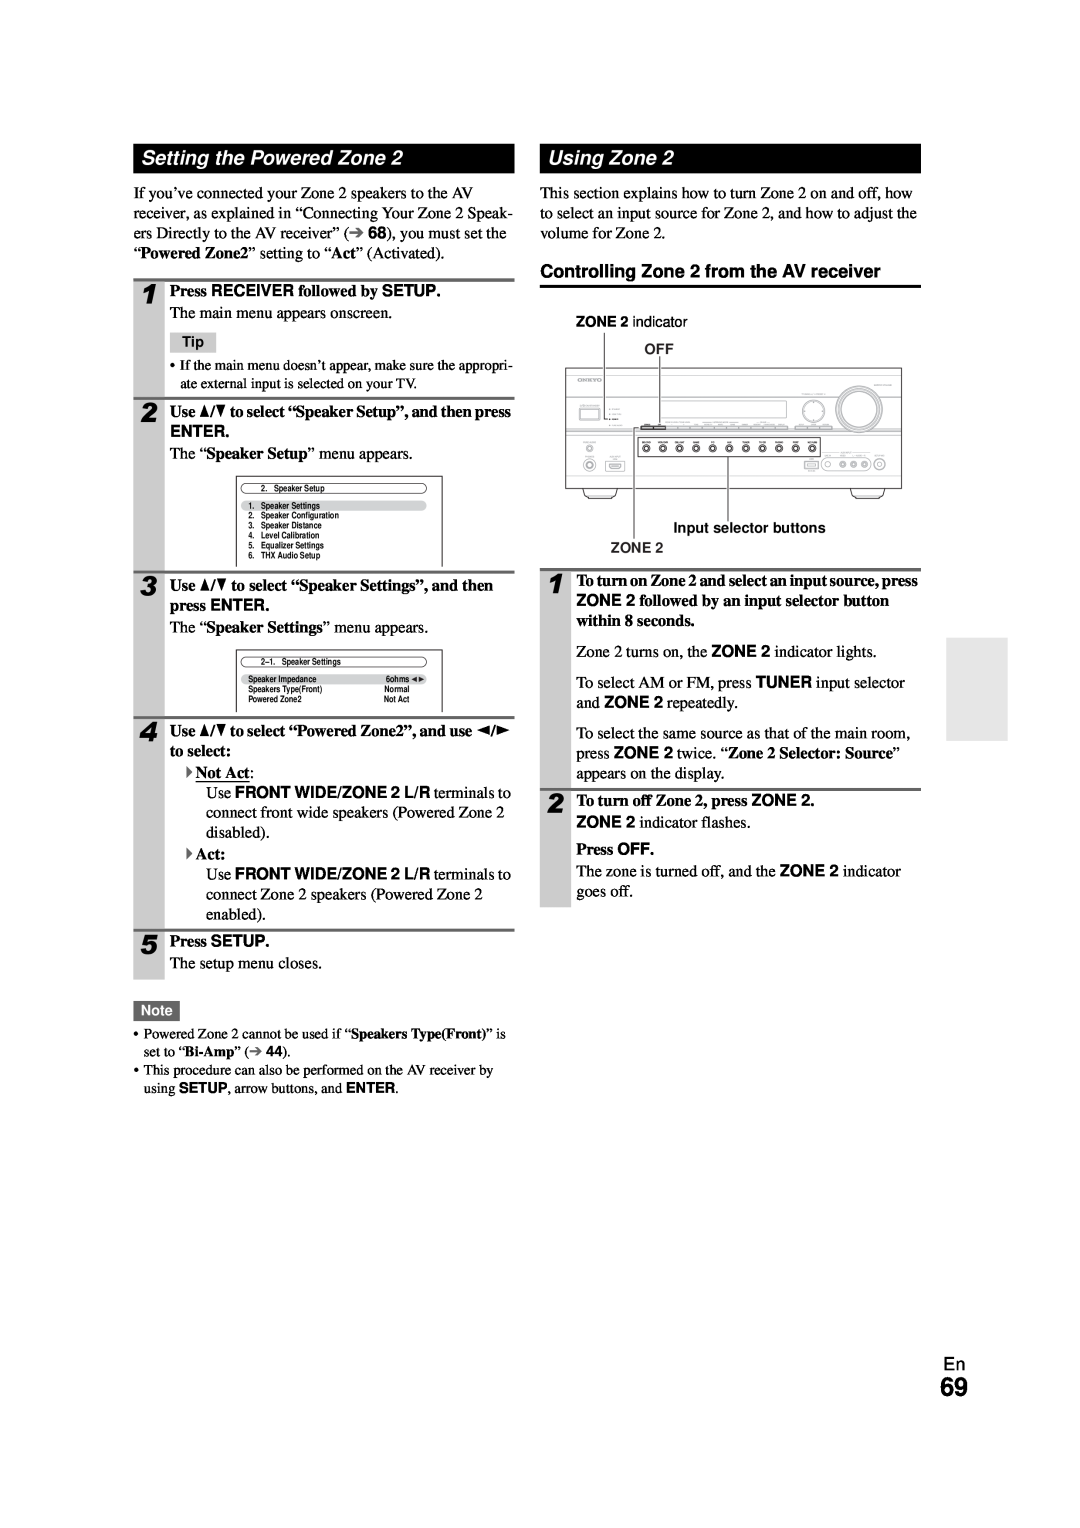 Onkyo HT-RC270 instruction manual Setting the Powered Zone, Using Zone, Controlling Zone 2 from the AV receiver, Enter 